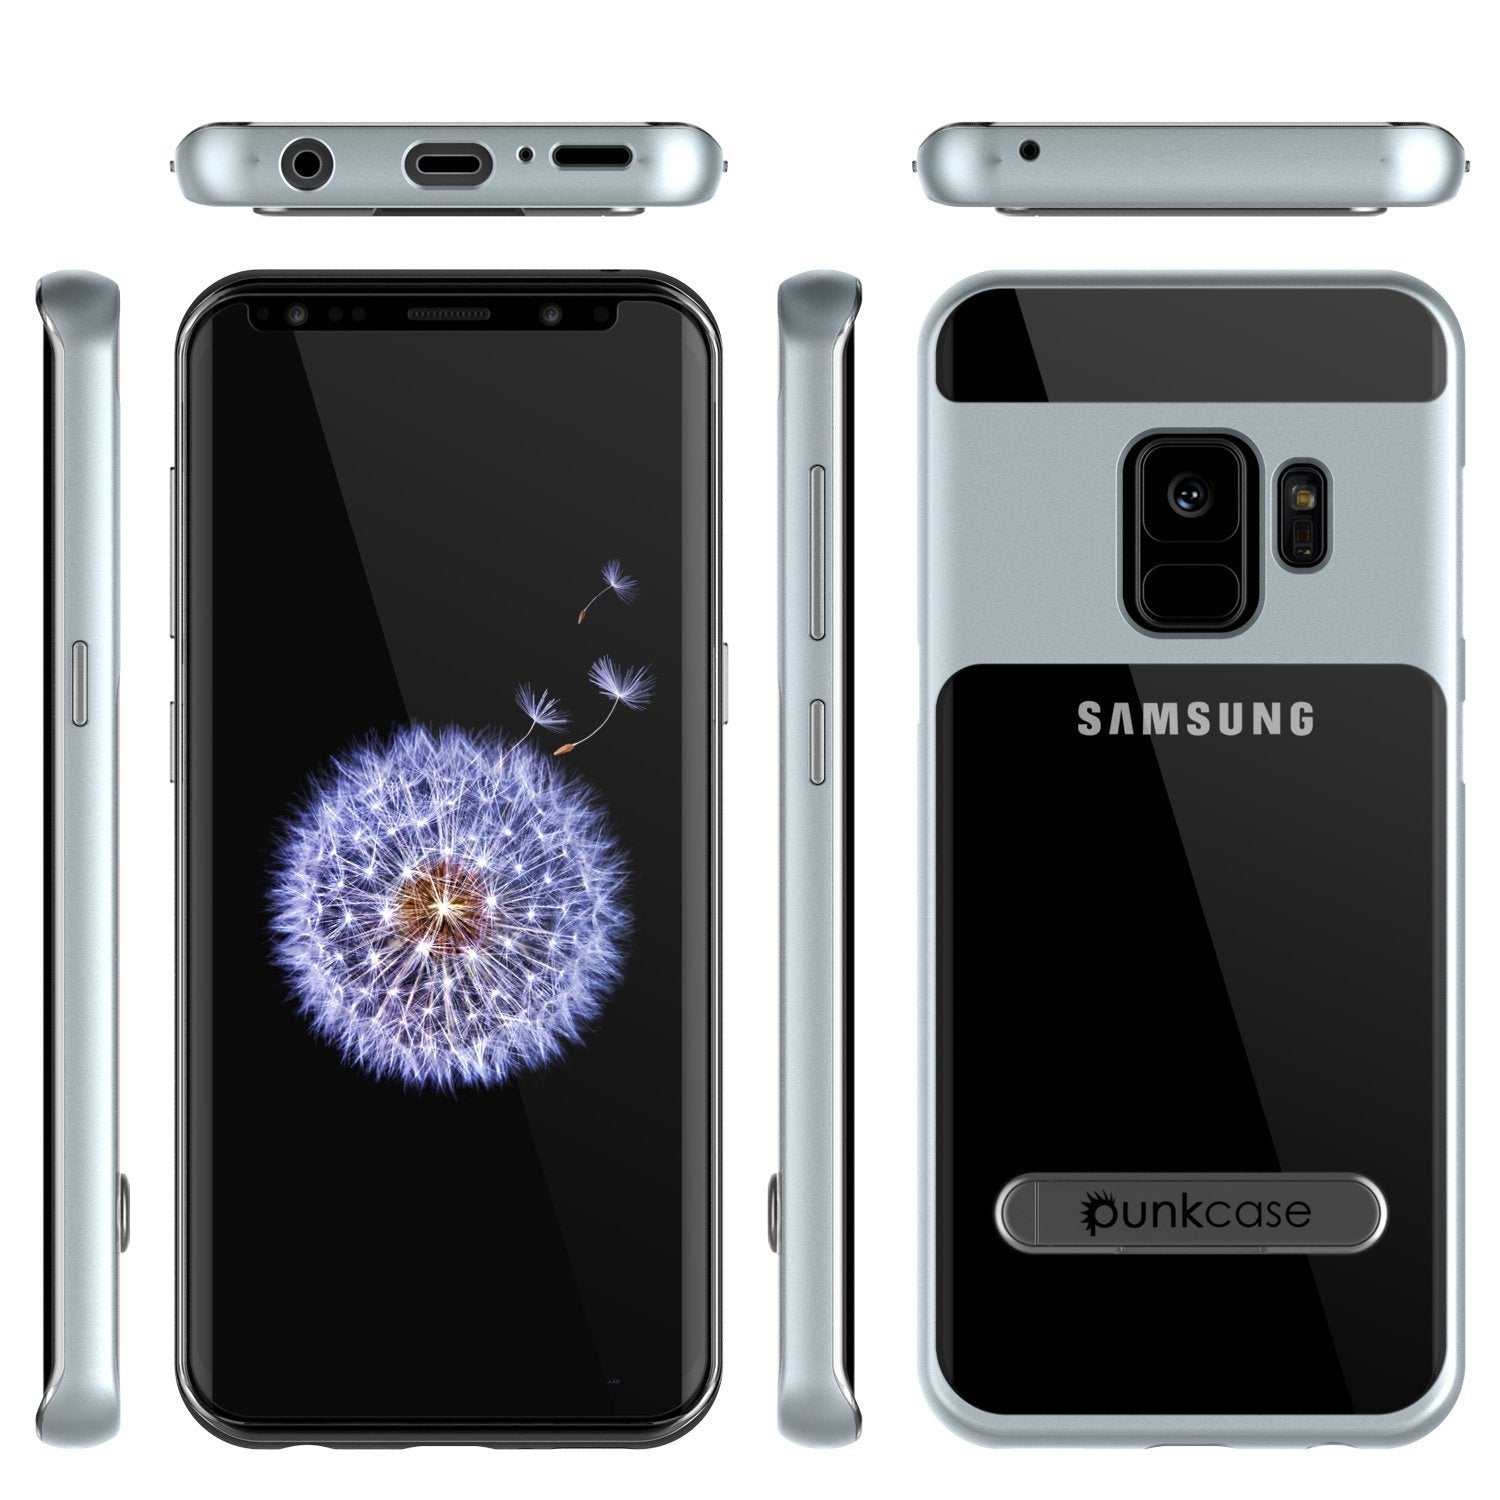 Galaxy S9 Punkcase, LUCID 3.0 Series Cover w/Kickstand, Silver